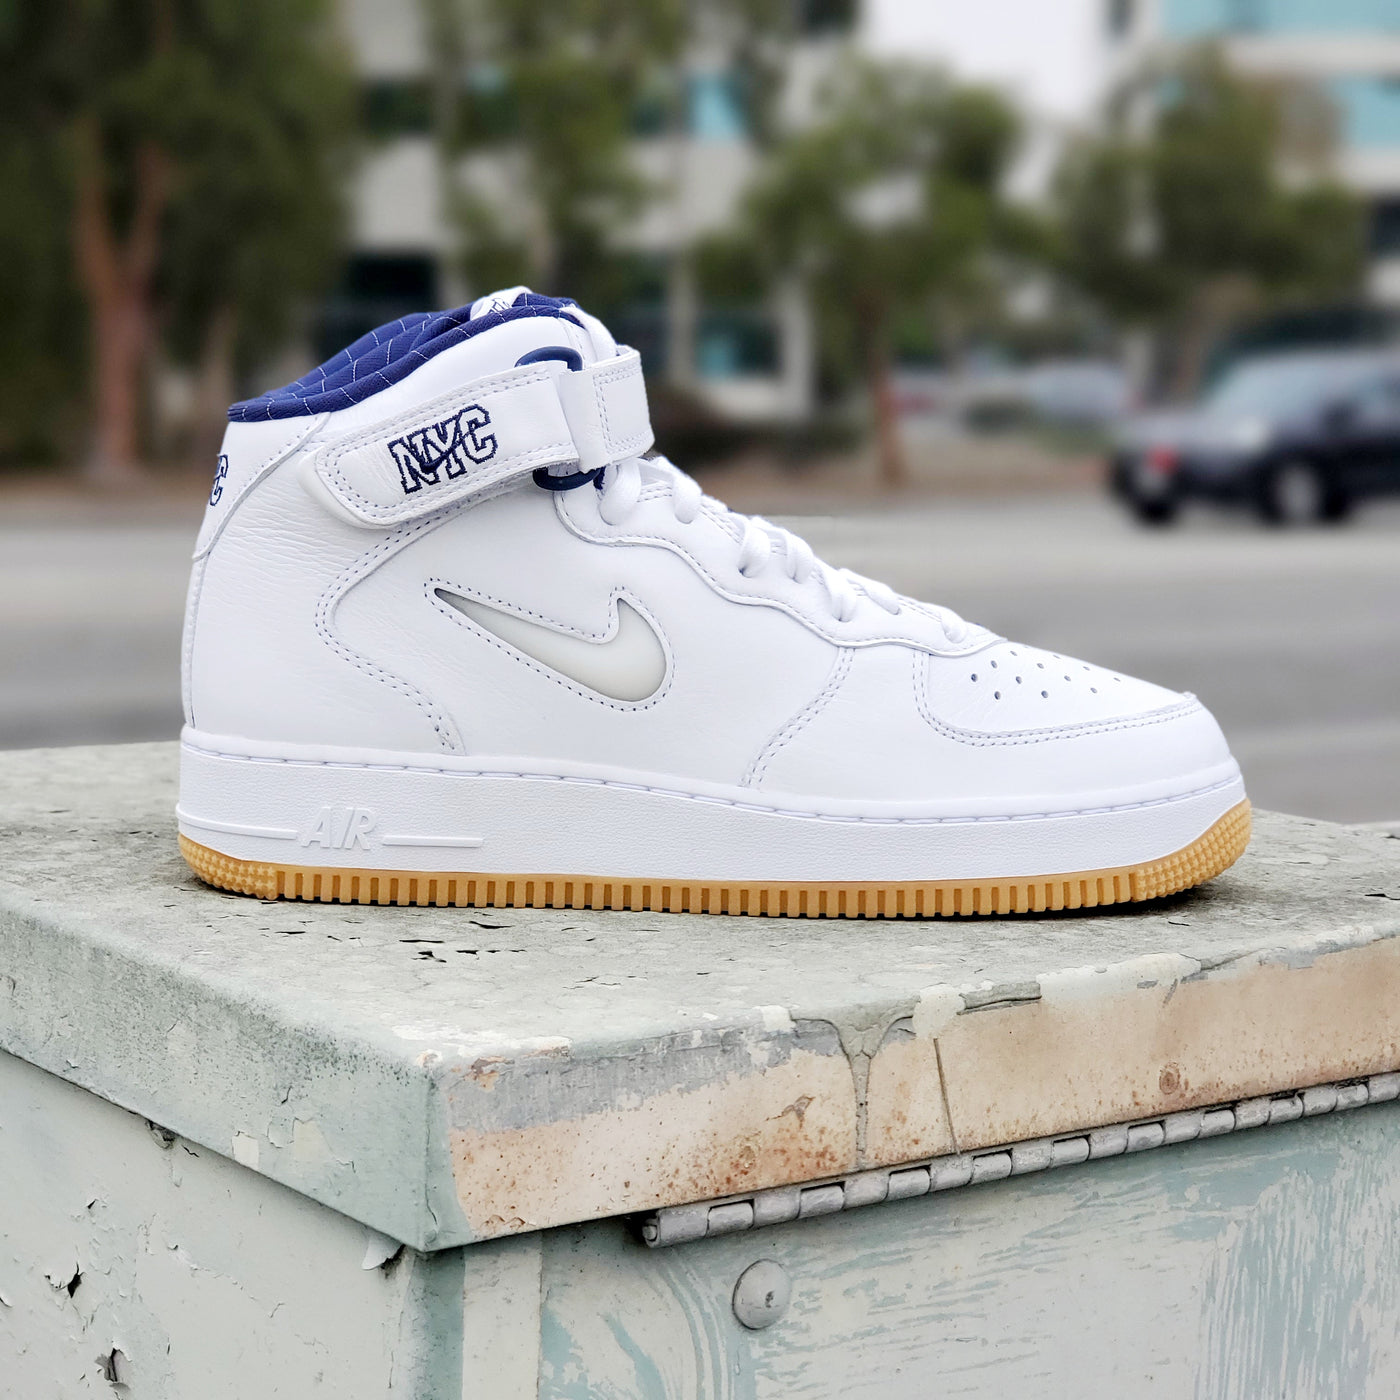 Nike's Air Force 1 Mid QS is a Jewel in their Sneaker Crown